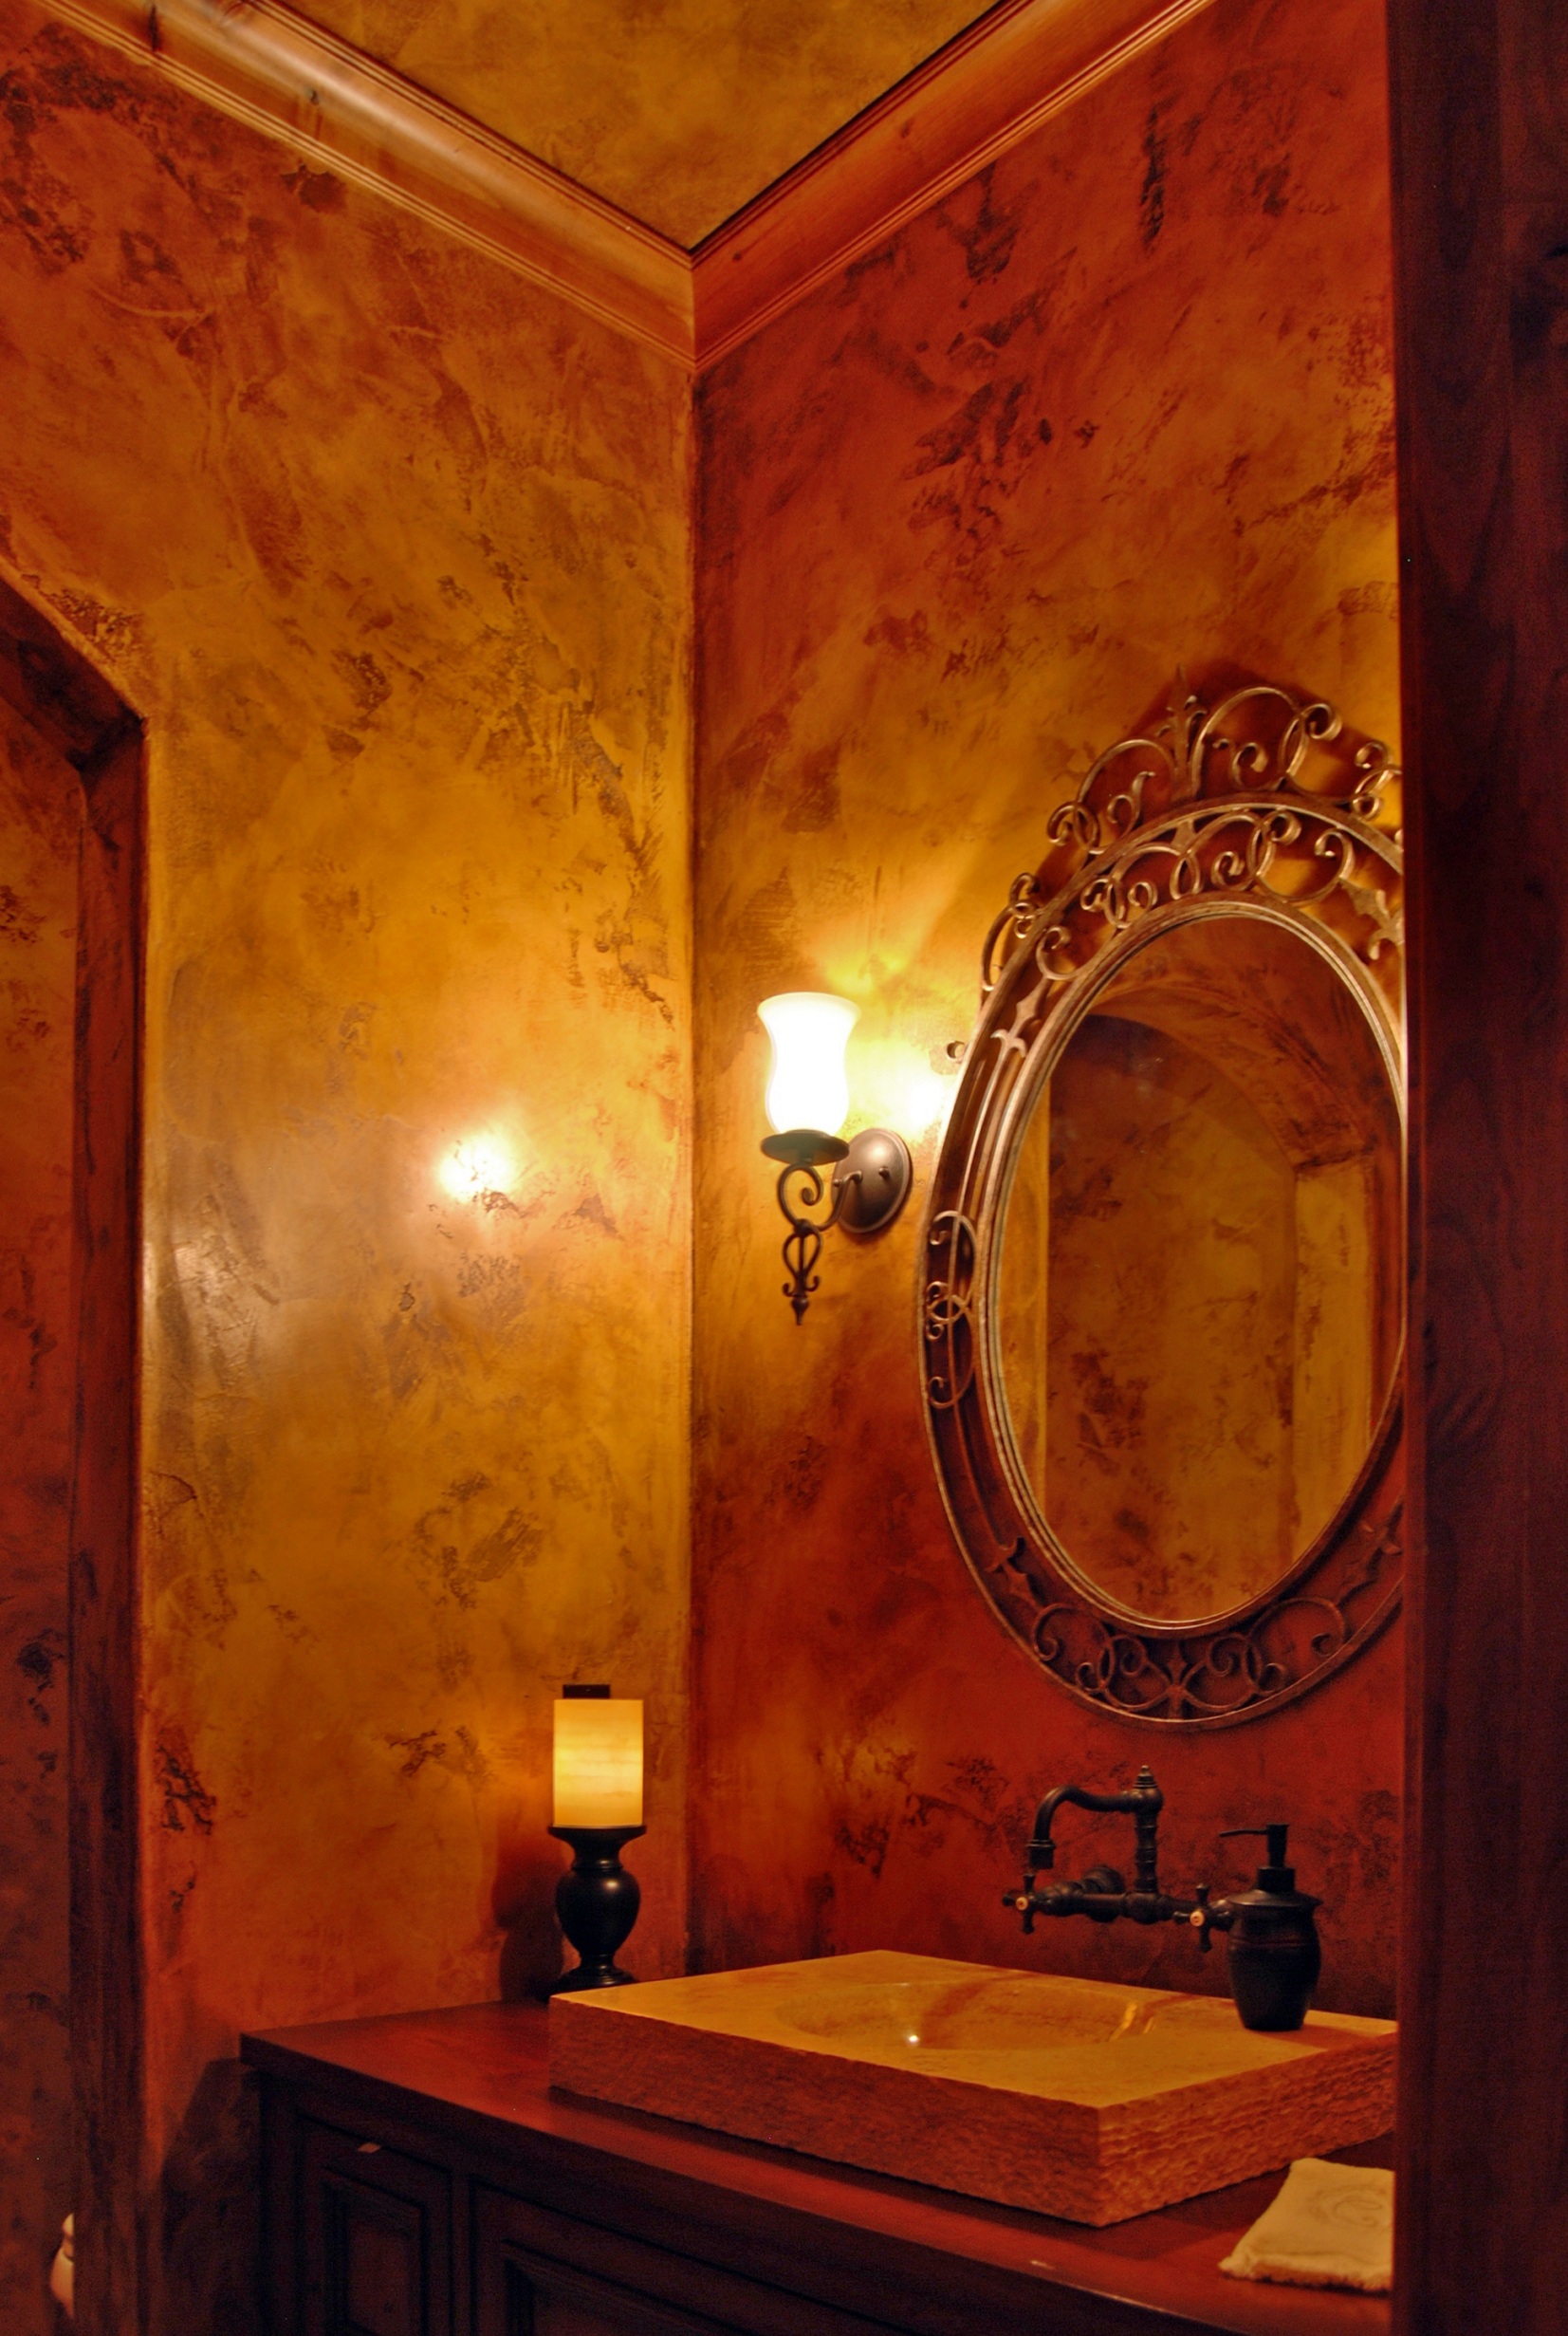    Brad Allen’s      Venetian Plaster Plus    Specializing in creative  Venetian Plaster  finishes for any décor,   PLUS  a wide variety of inspiring custom decorative and faux finishes. 